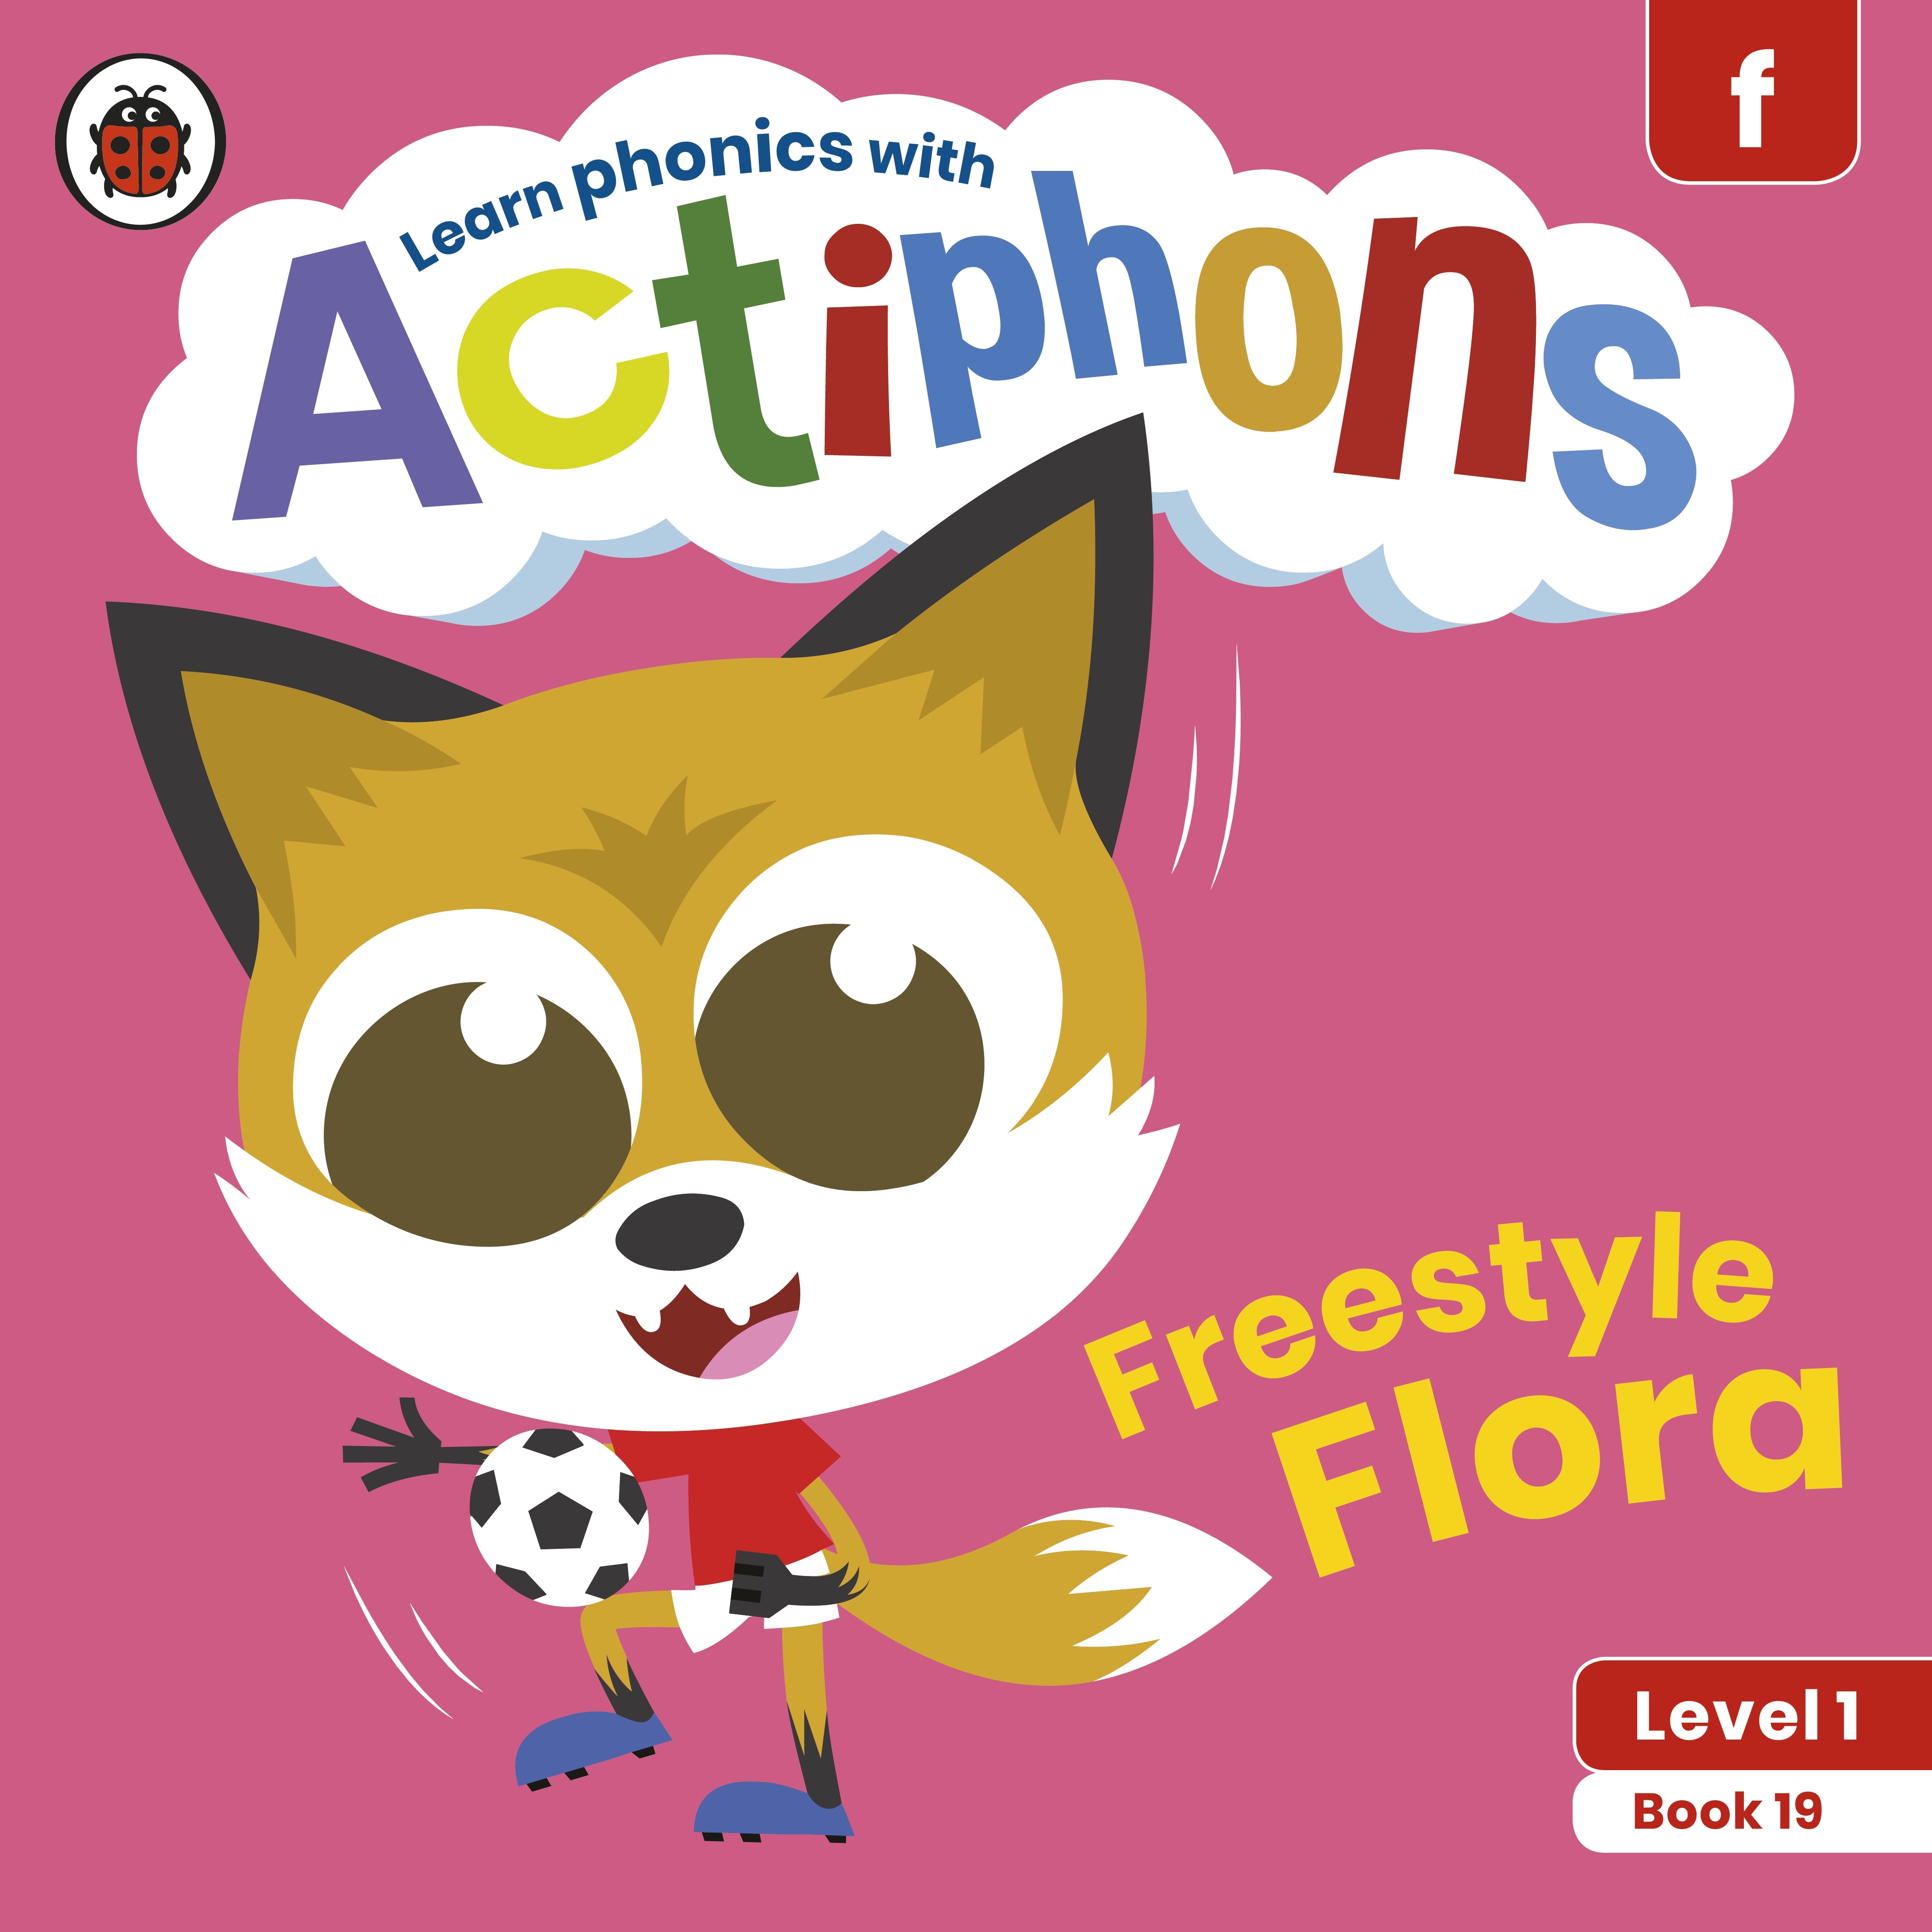 Actiphons Level 1 Book 19 Freestyle Flora